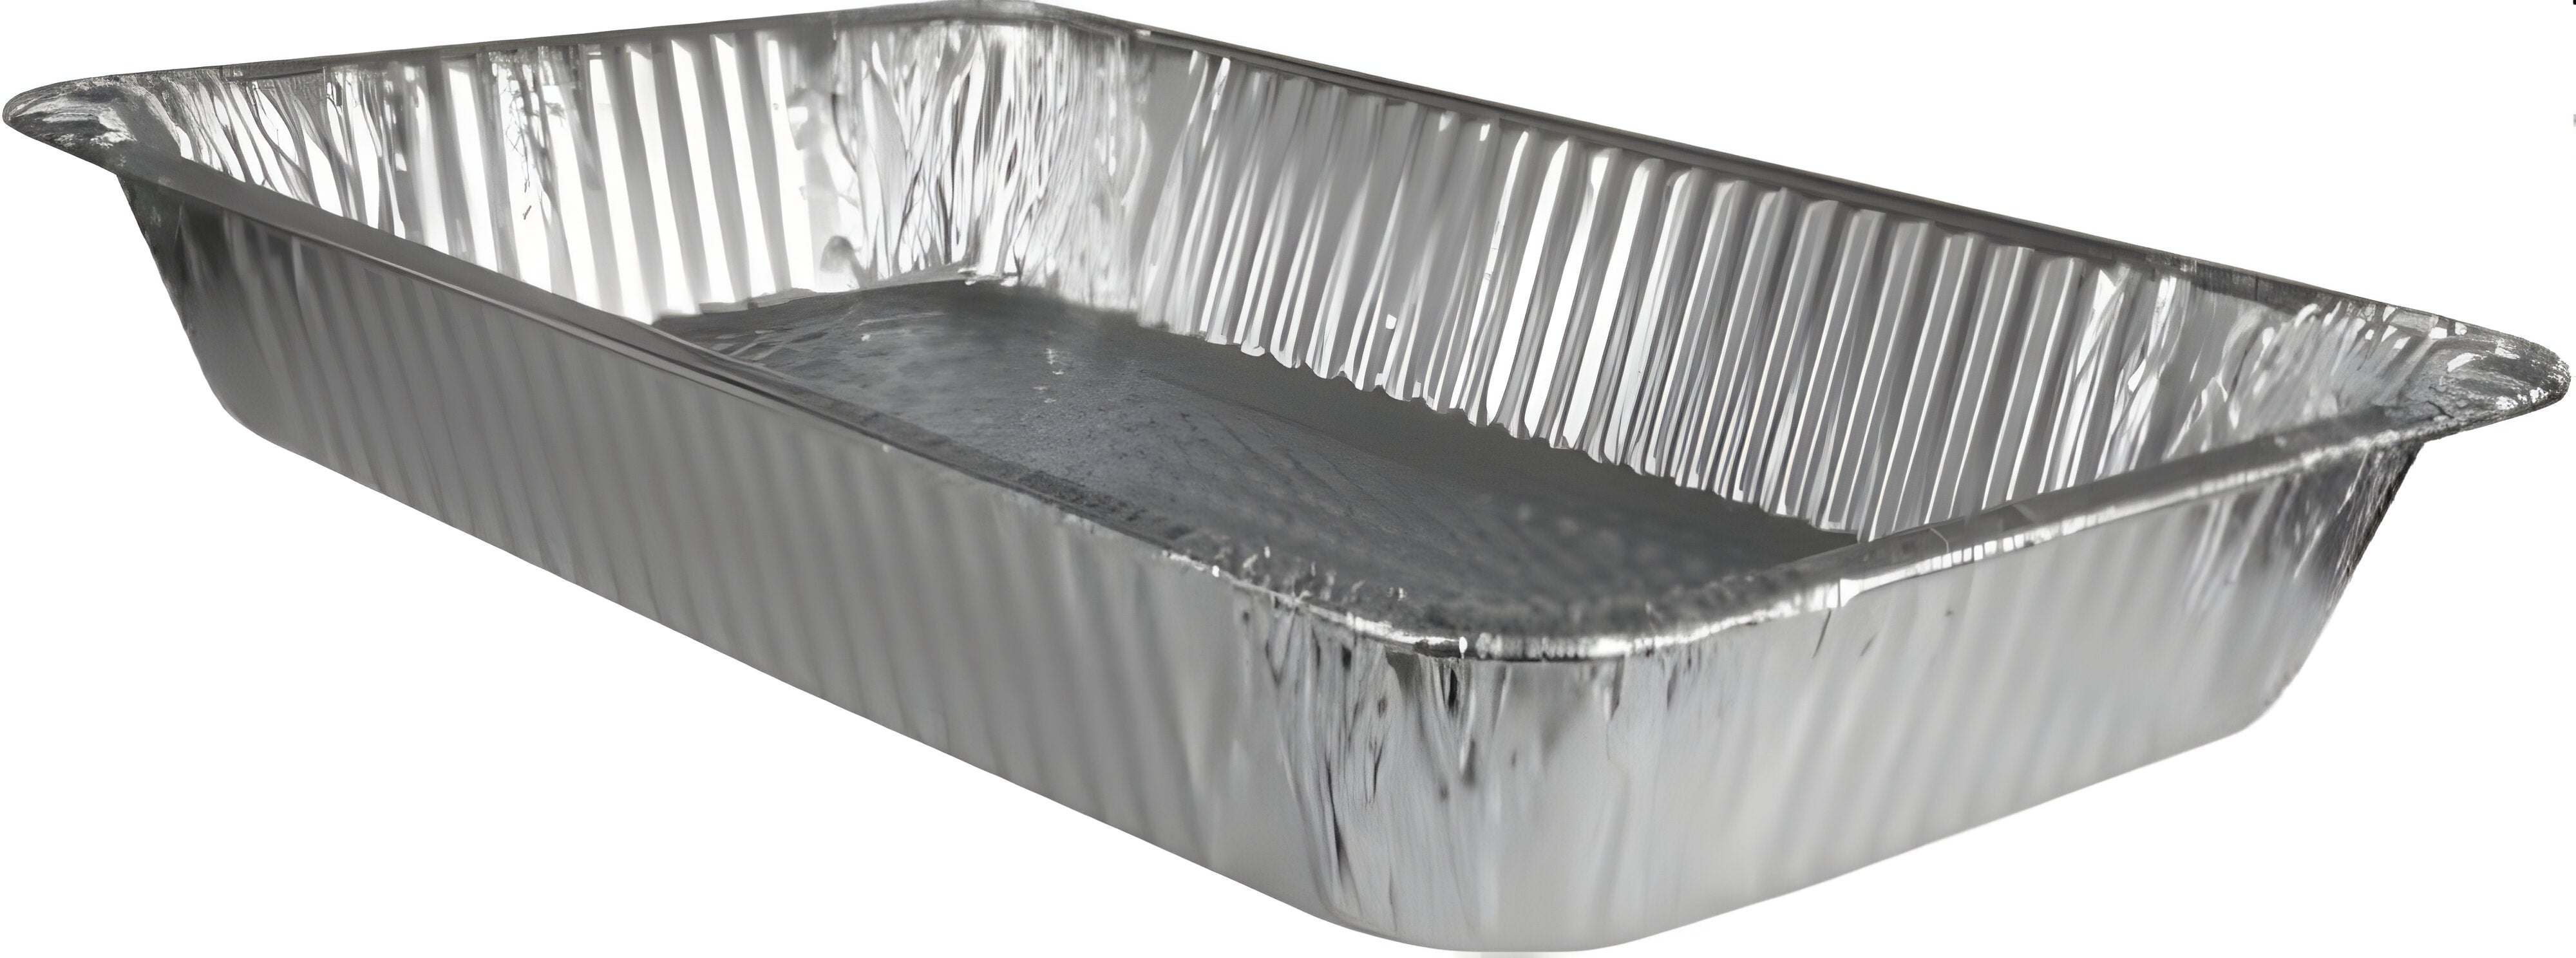 HFA - Full Size Deep Foil Containers, 50/Cs - 2019-00-50